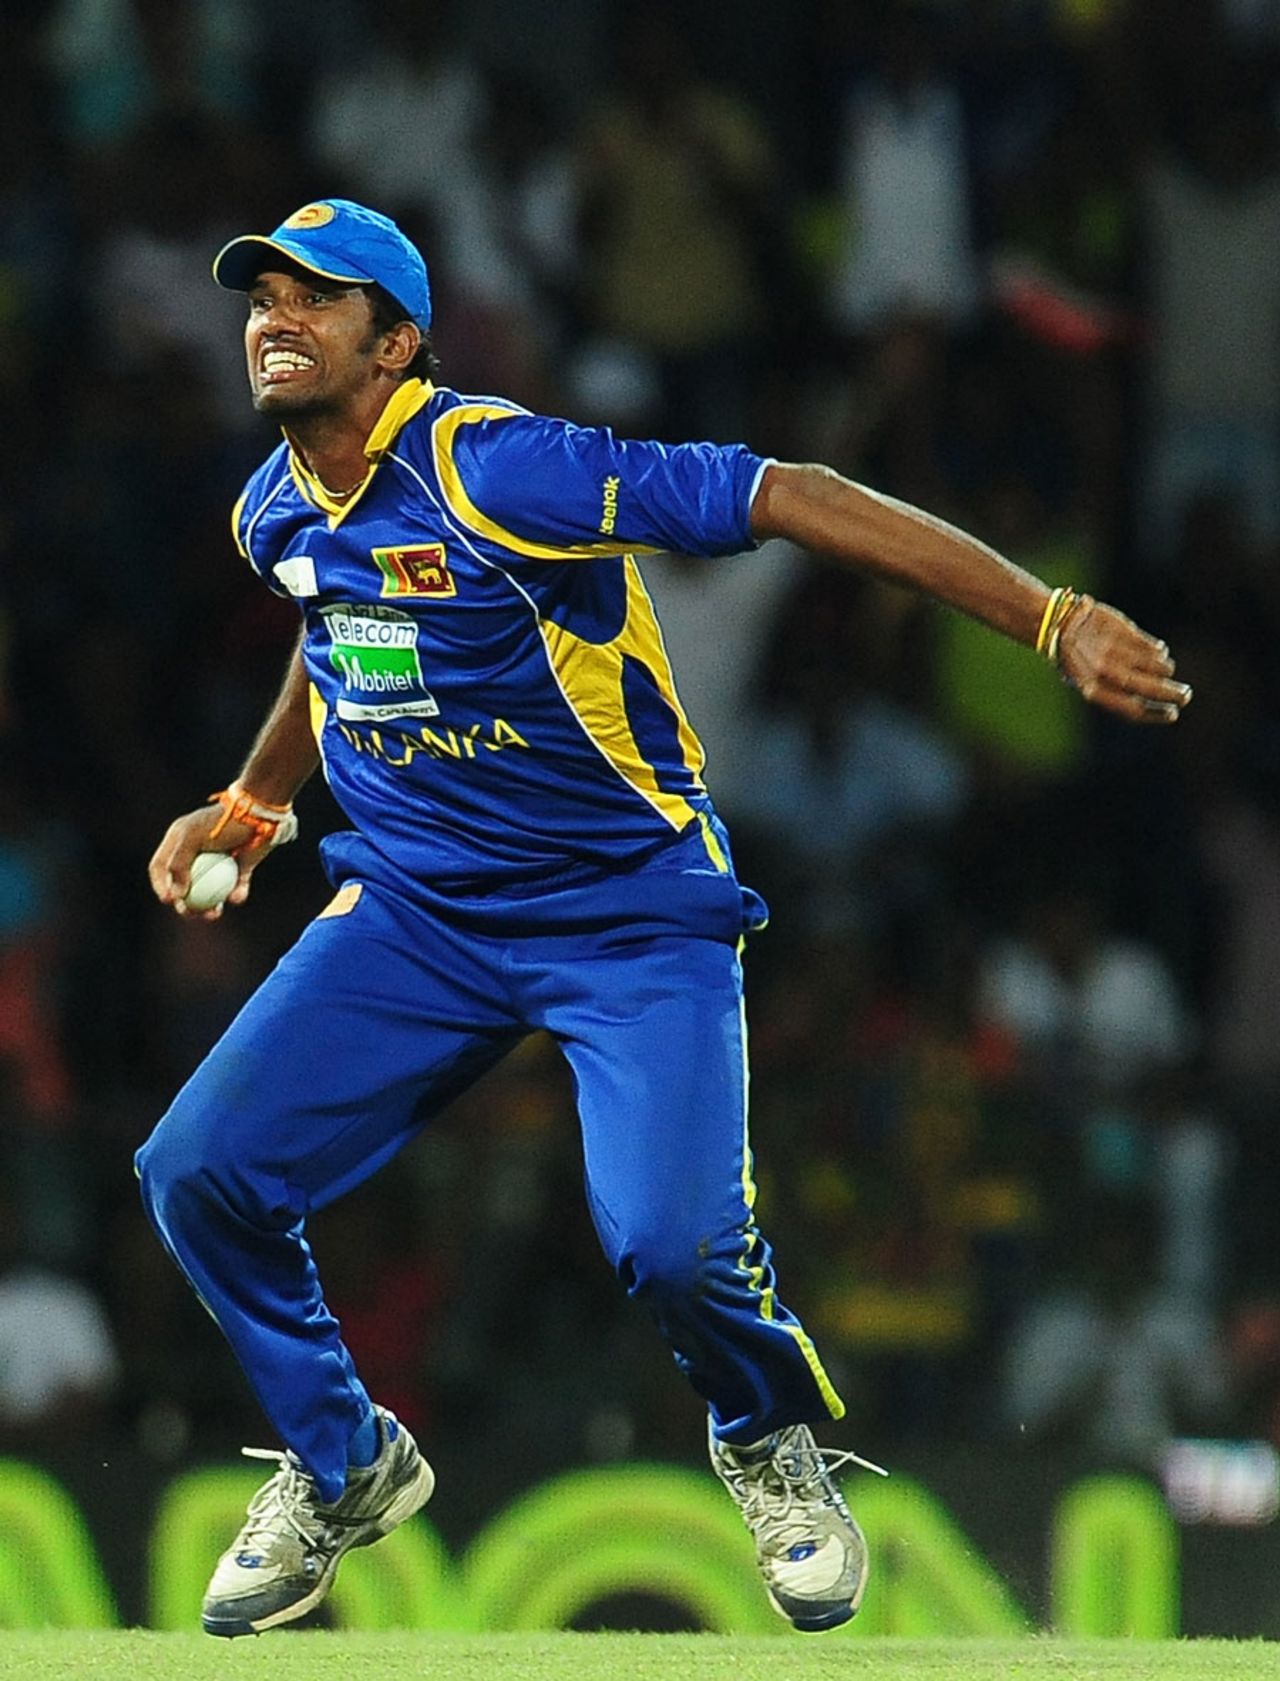 Sachithra Senanayake took out Virender Sehwag with a sharp catch, Sri Lanka v India, 4th ODI, Colombo, July 31, 2012